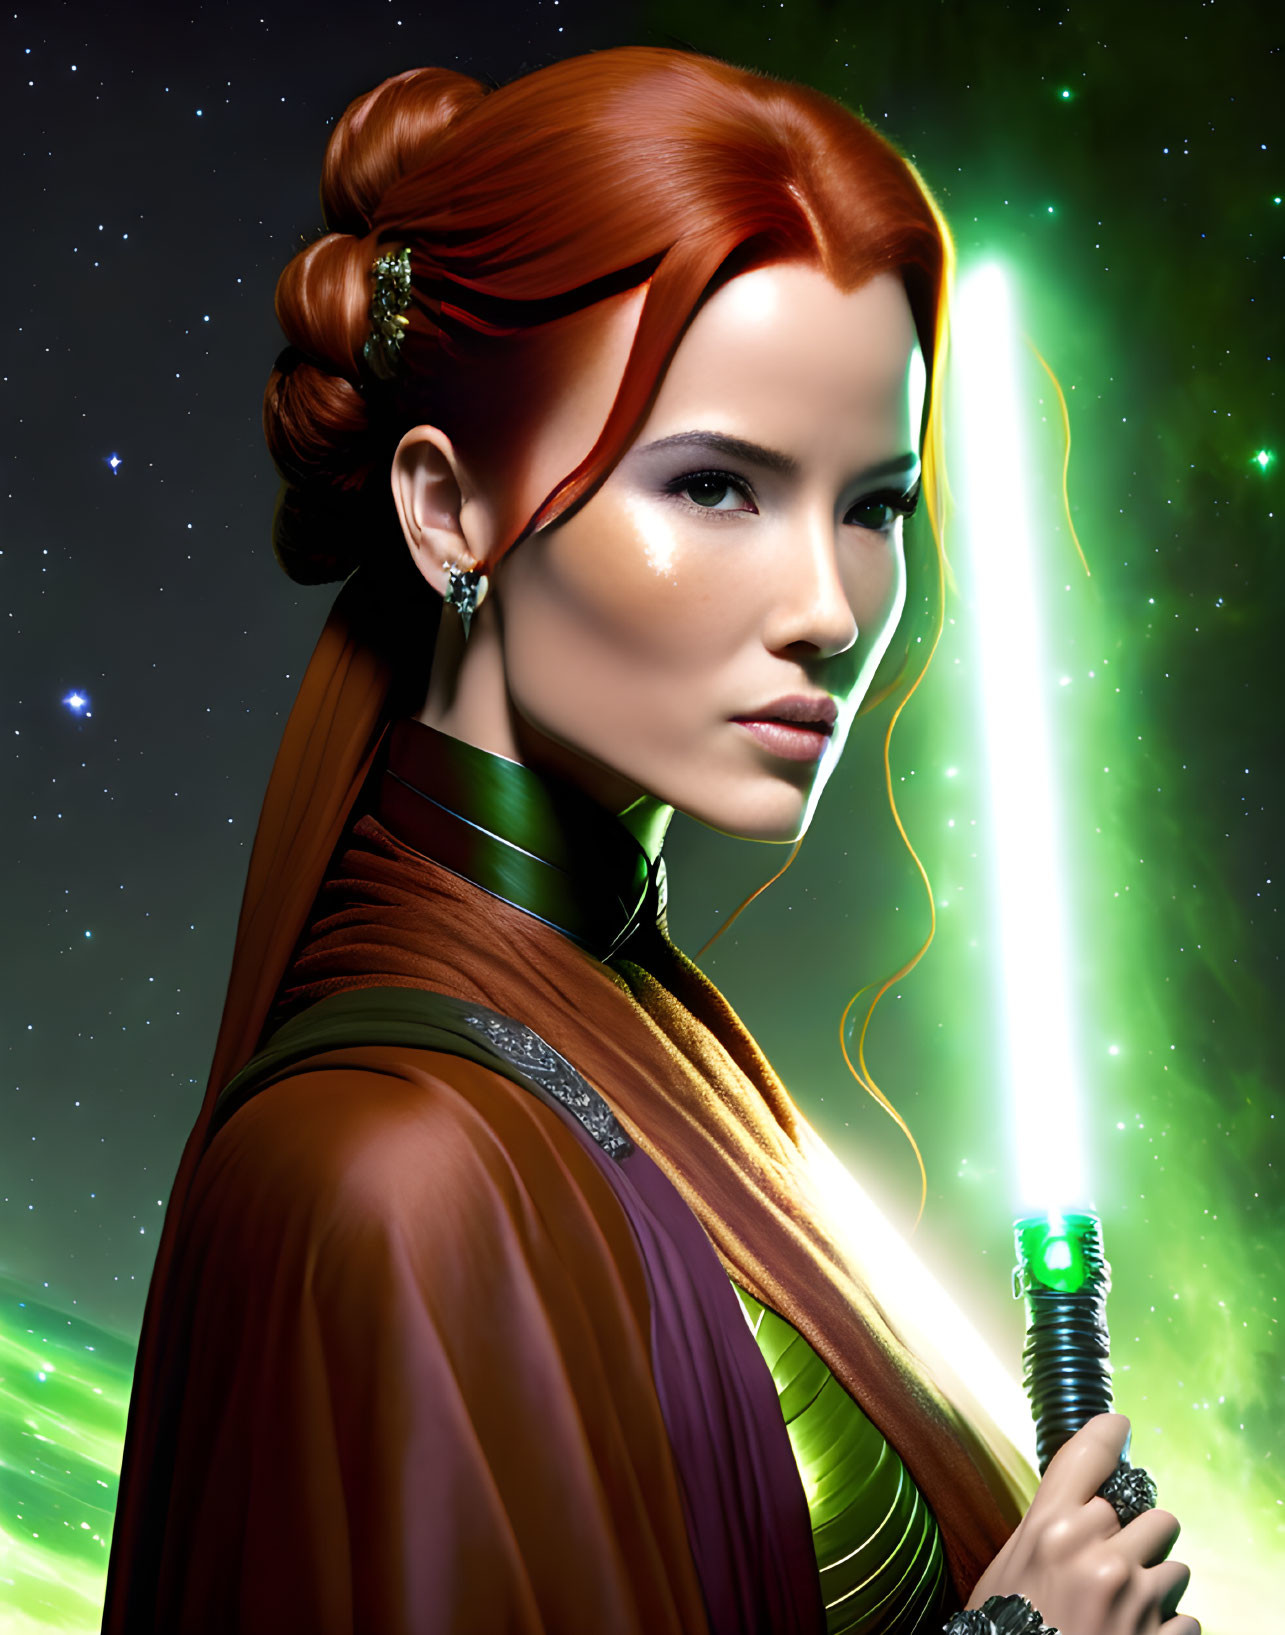 Red-Haired Woman with Green Lightsaber in Sci-Fi Digital Art